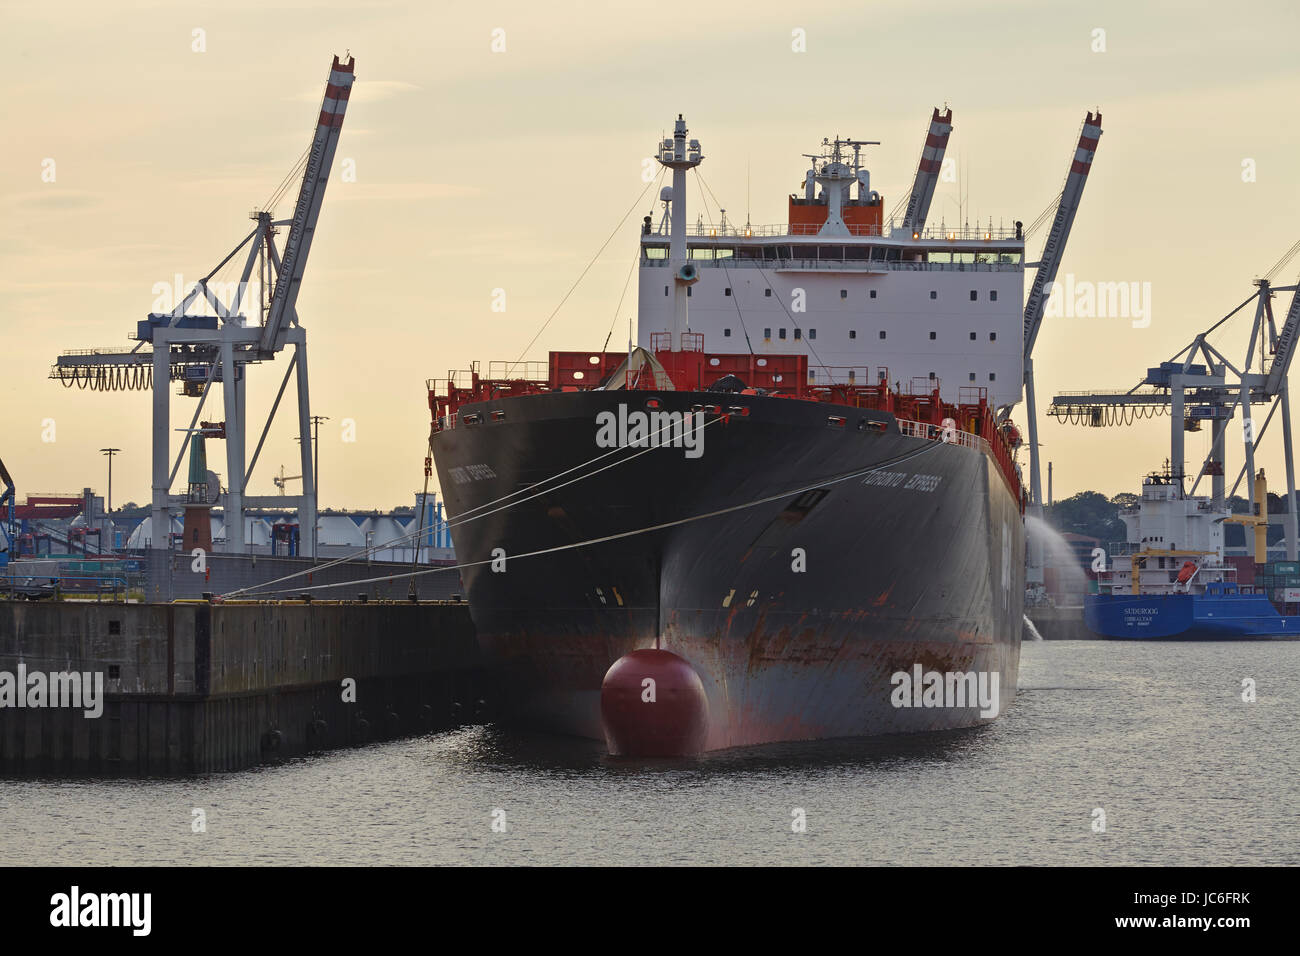 The container vessel Toronto Express in the Ellerholz Port of Hamburg taken with contre-jour on August 8, 2014. Stock Photo